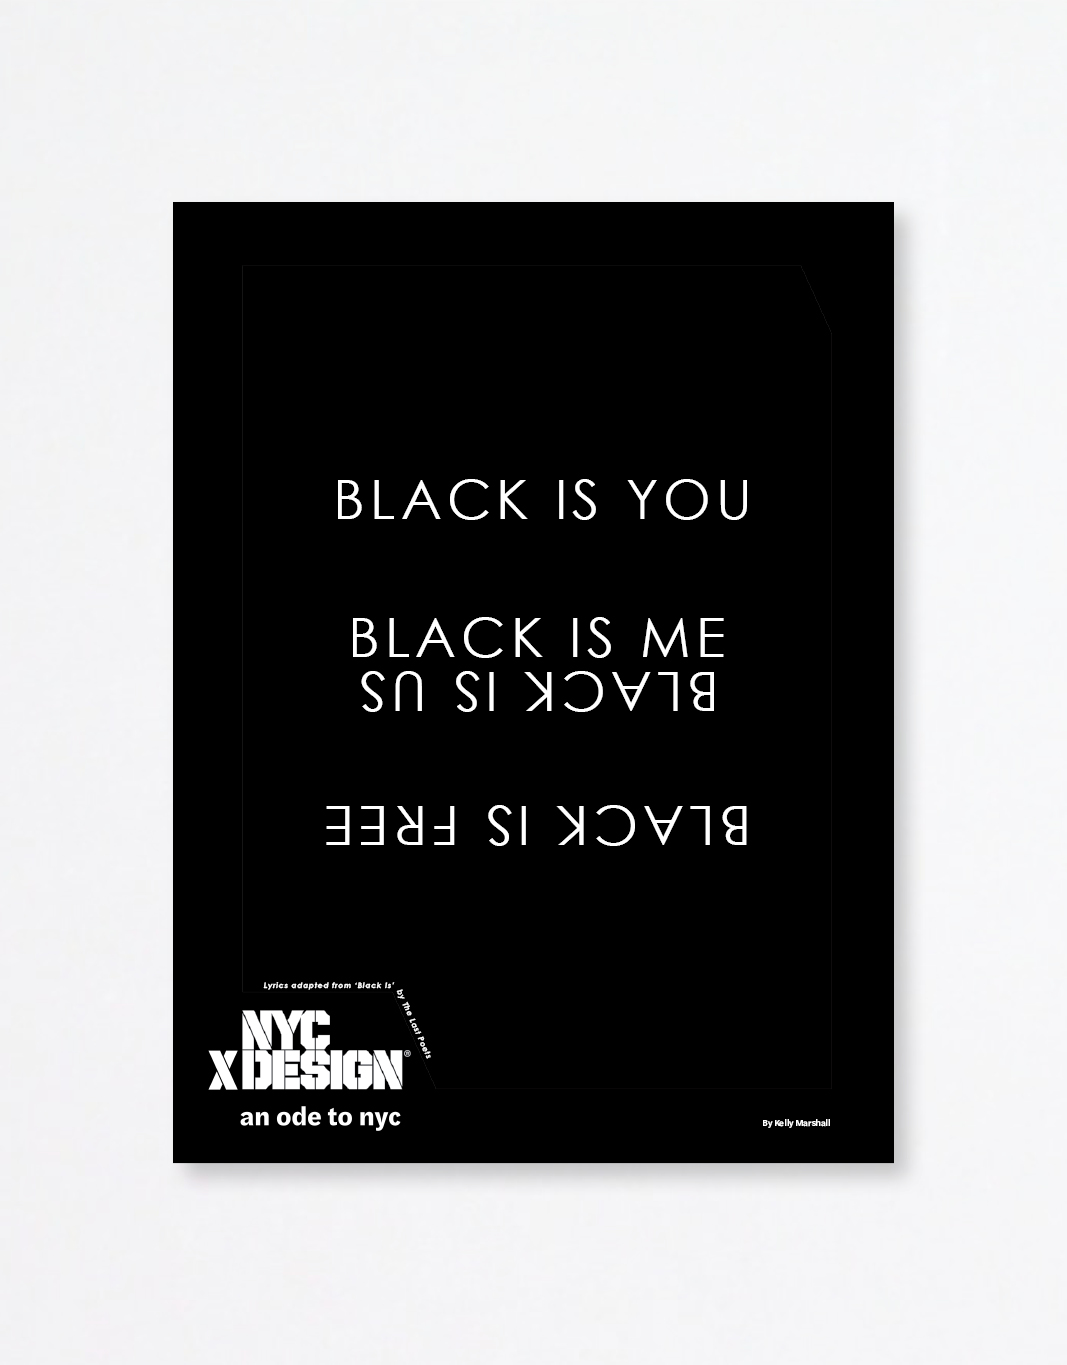 a poster showing white texts in black background. The texts say 